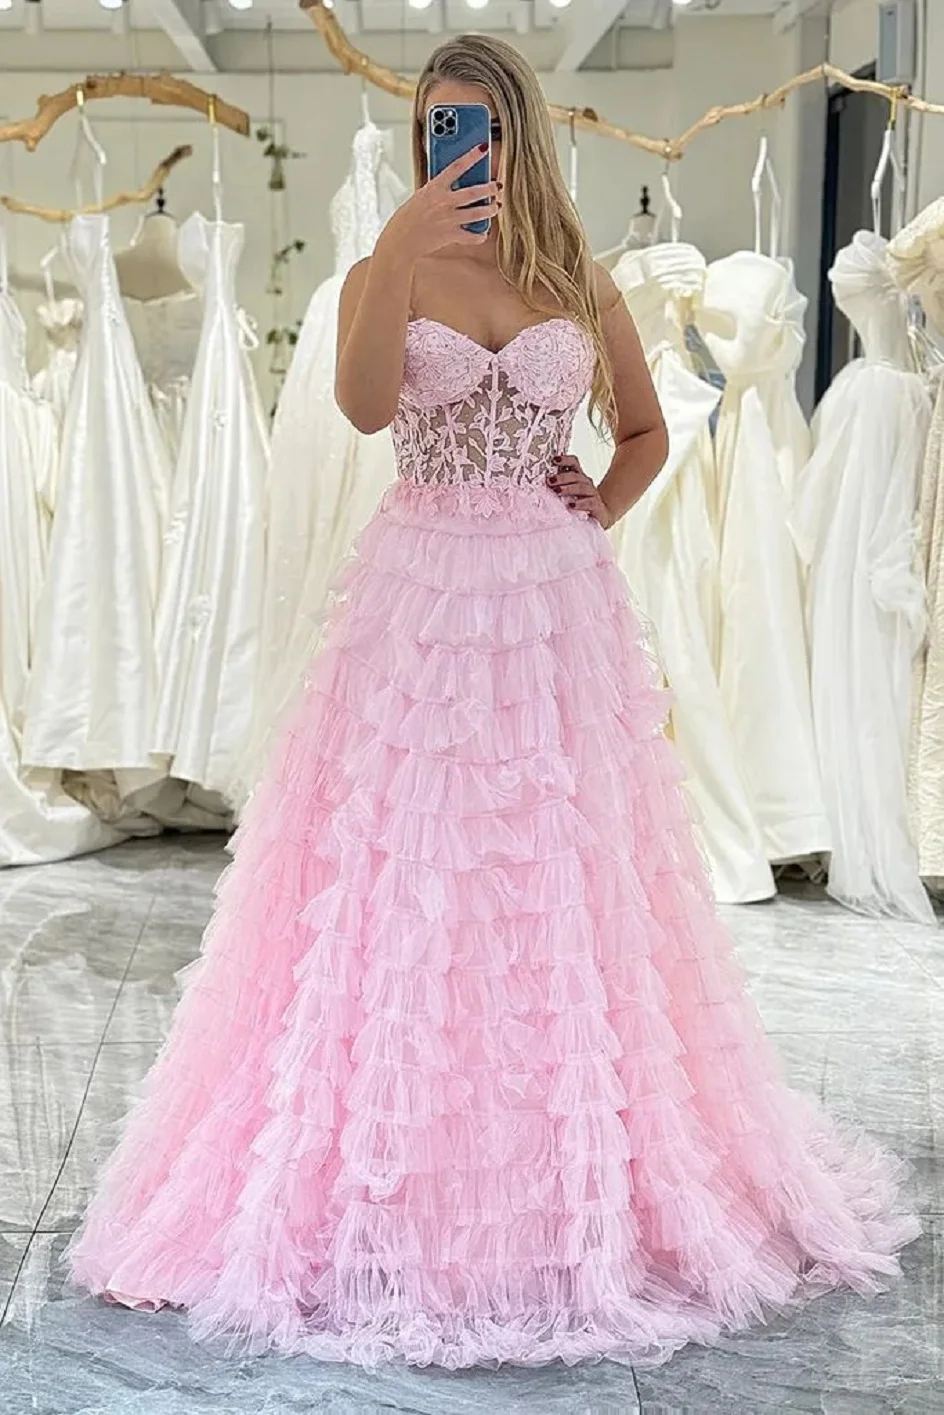 

Pink A-Line Strapless Tiered Long Corset Prom Dress with Lace Prom Dresses Spaghetti Straps Lace Applique Sweetheart Sweep Train